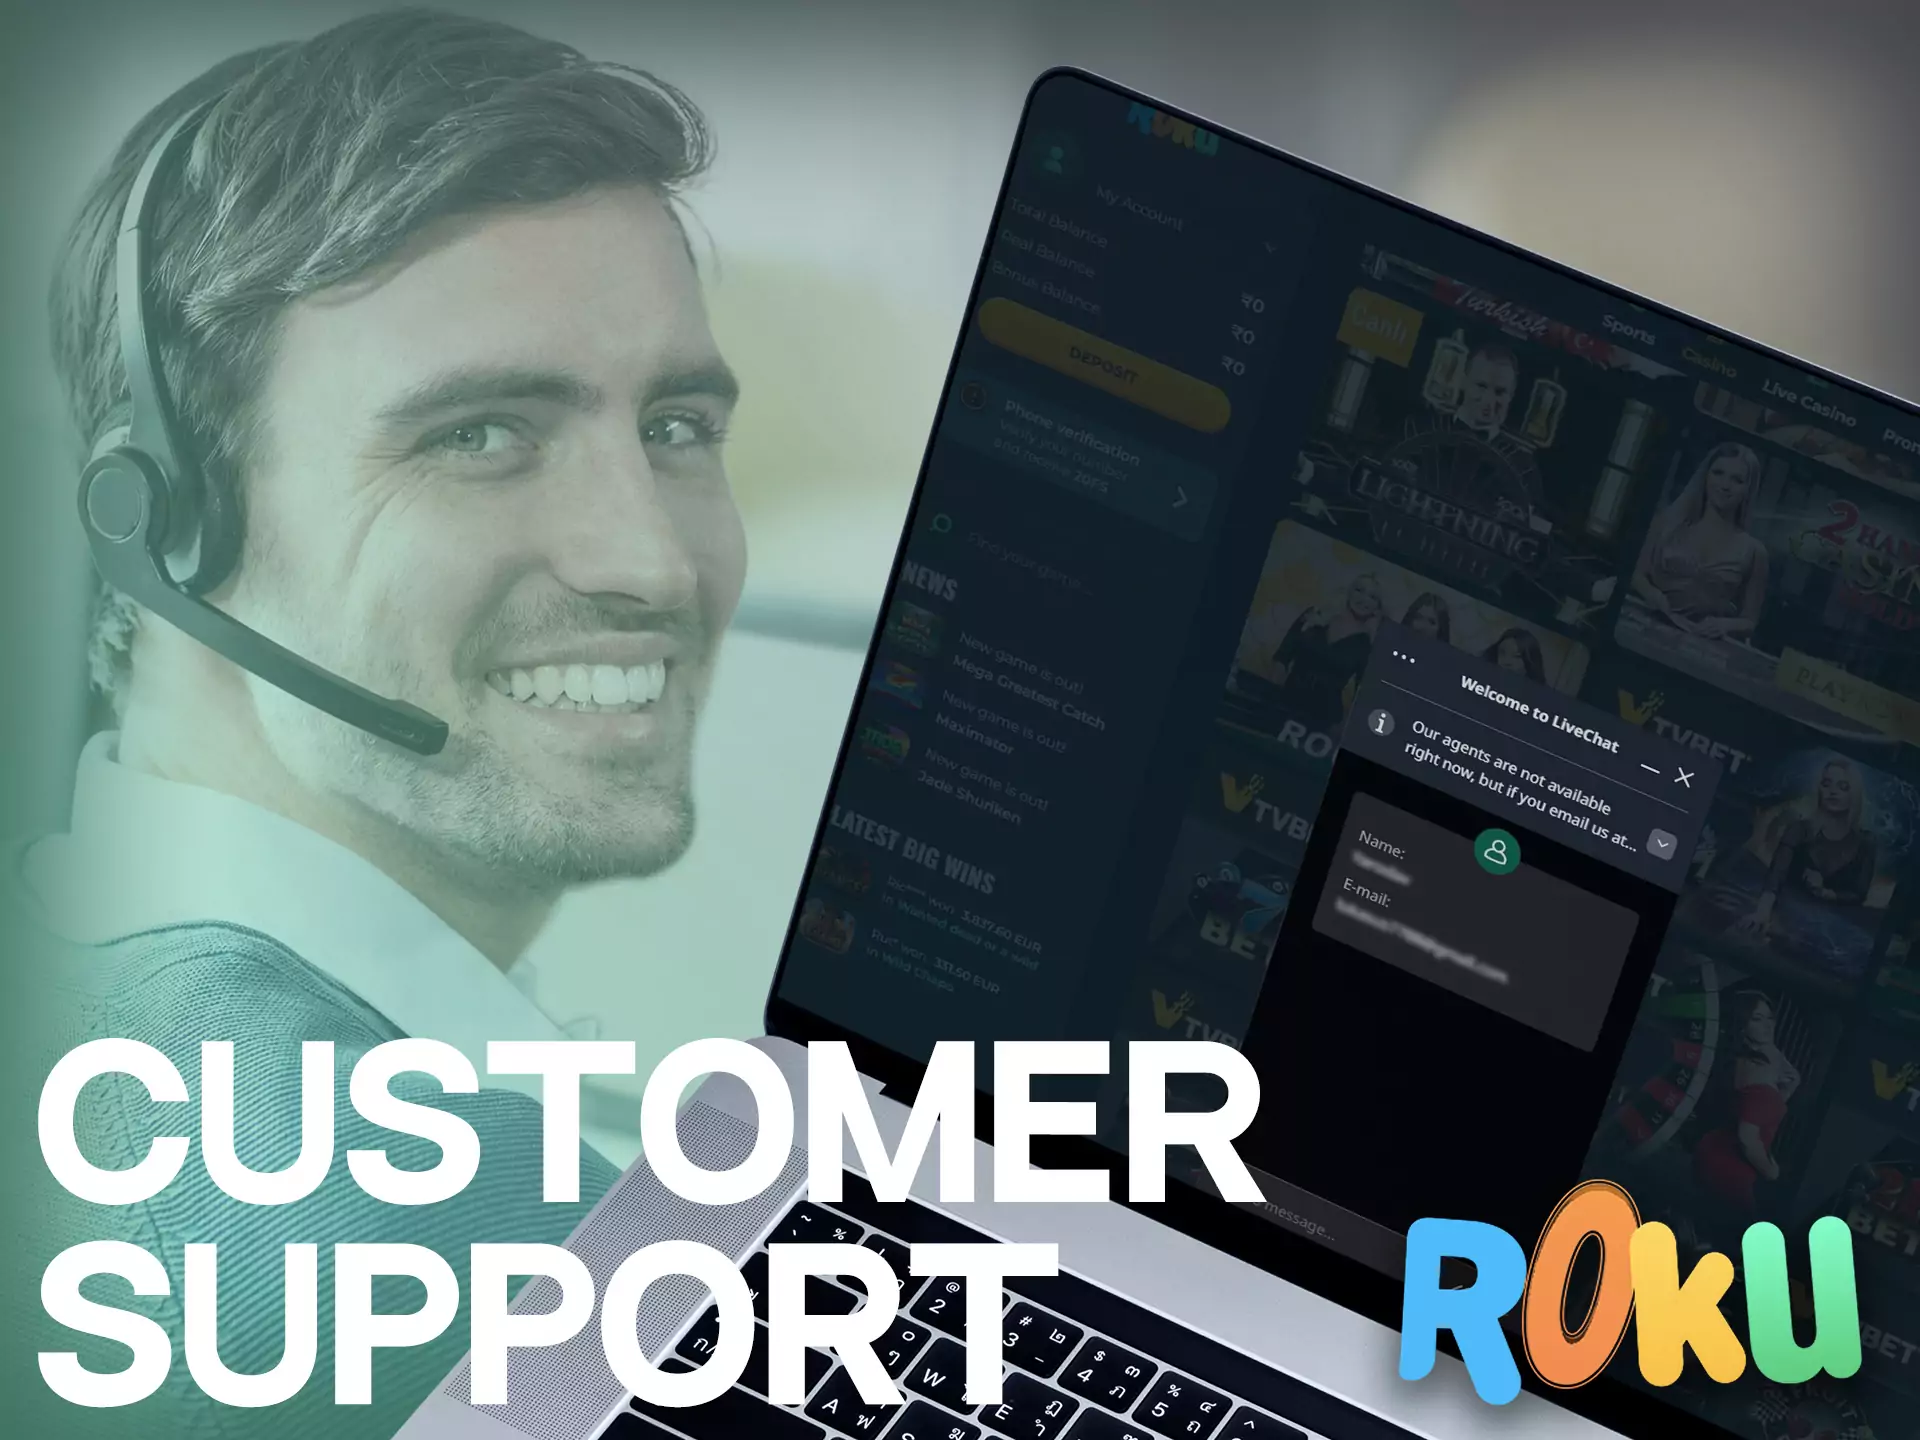 If you have questions or issues, write to an online chat on the Rokubet website.